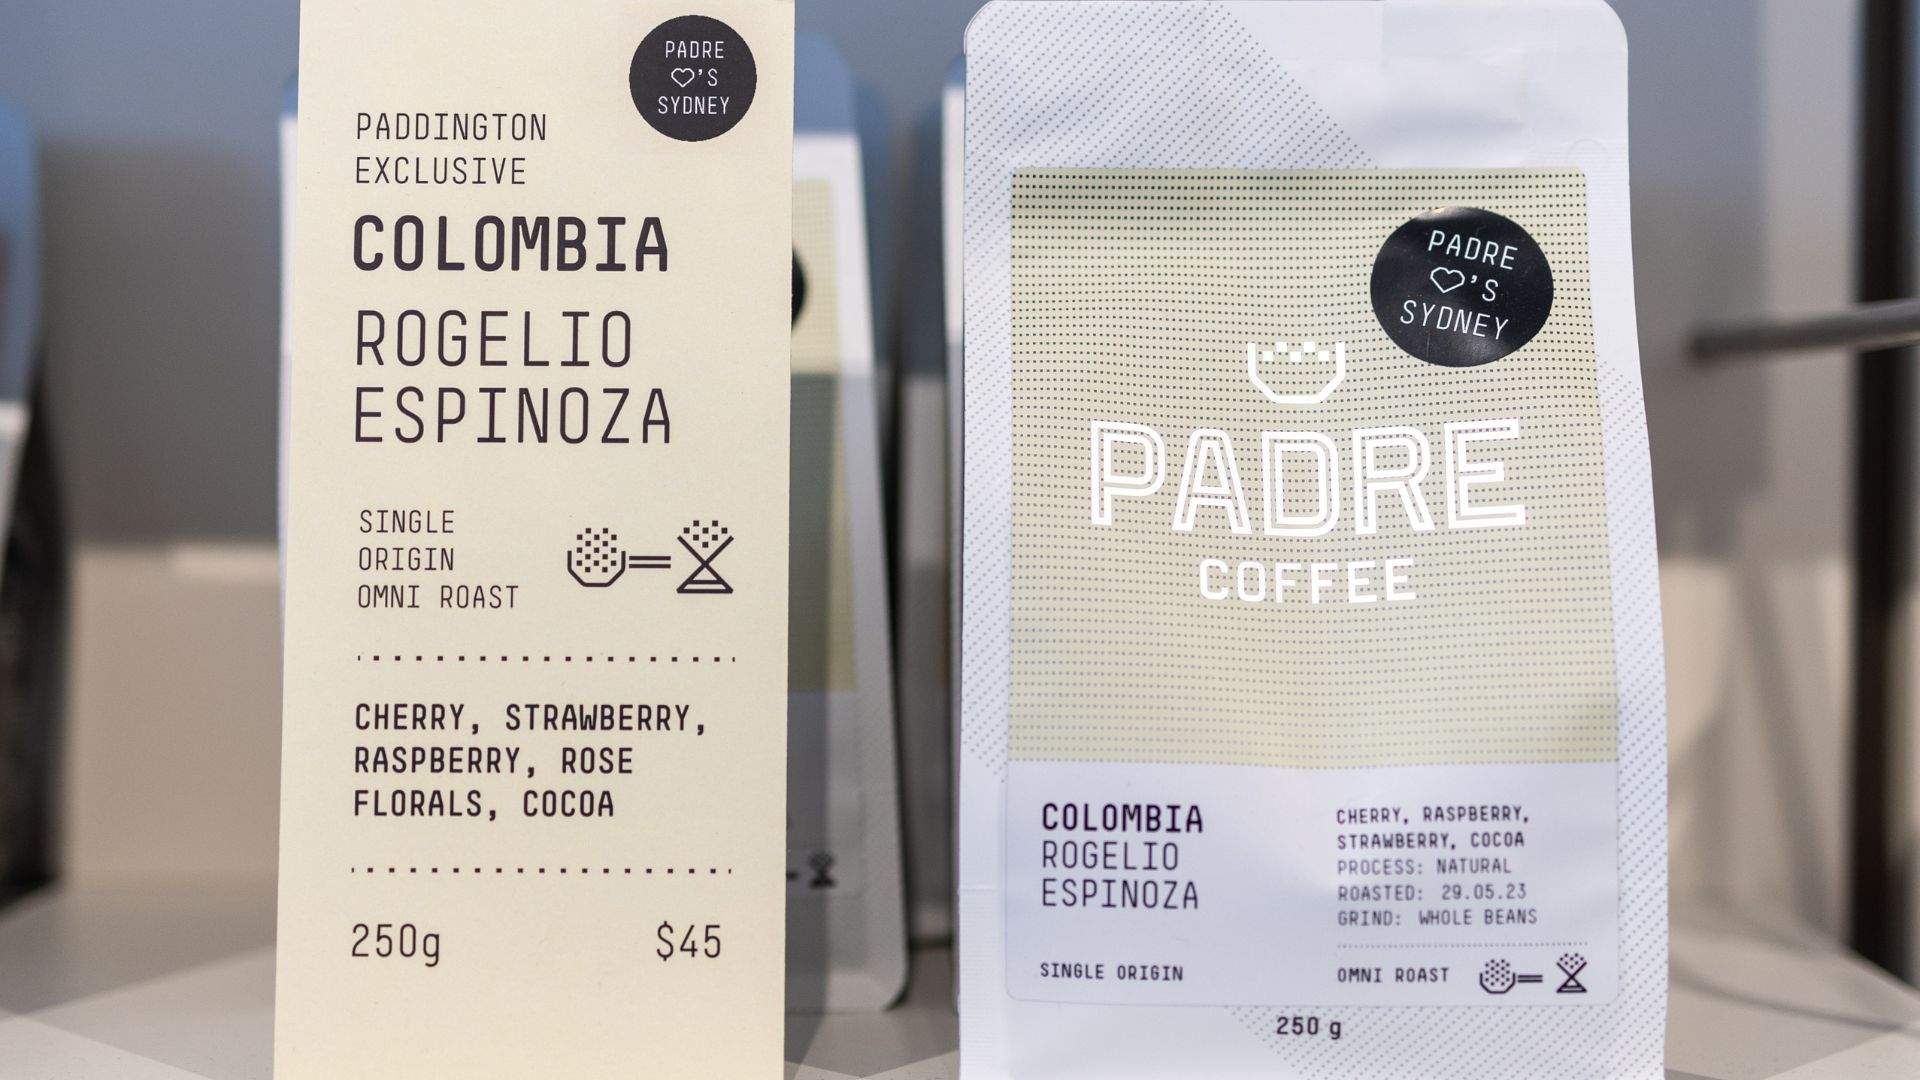 Now Open: Melbourne's Beloved Padre Coffee Has Unveiled Its First Sydney Outpost